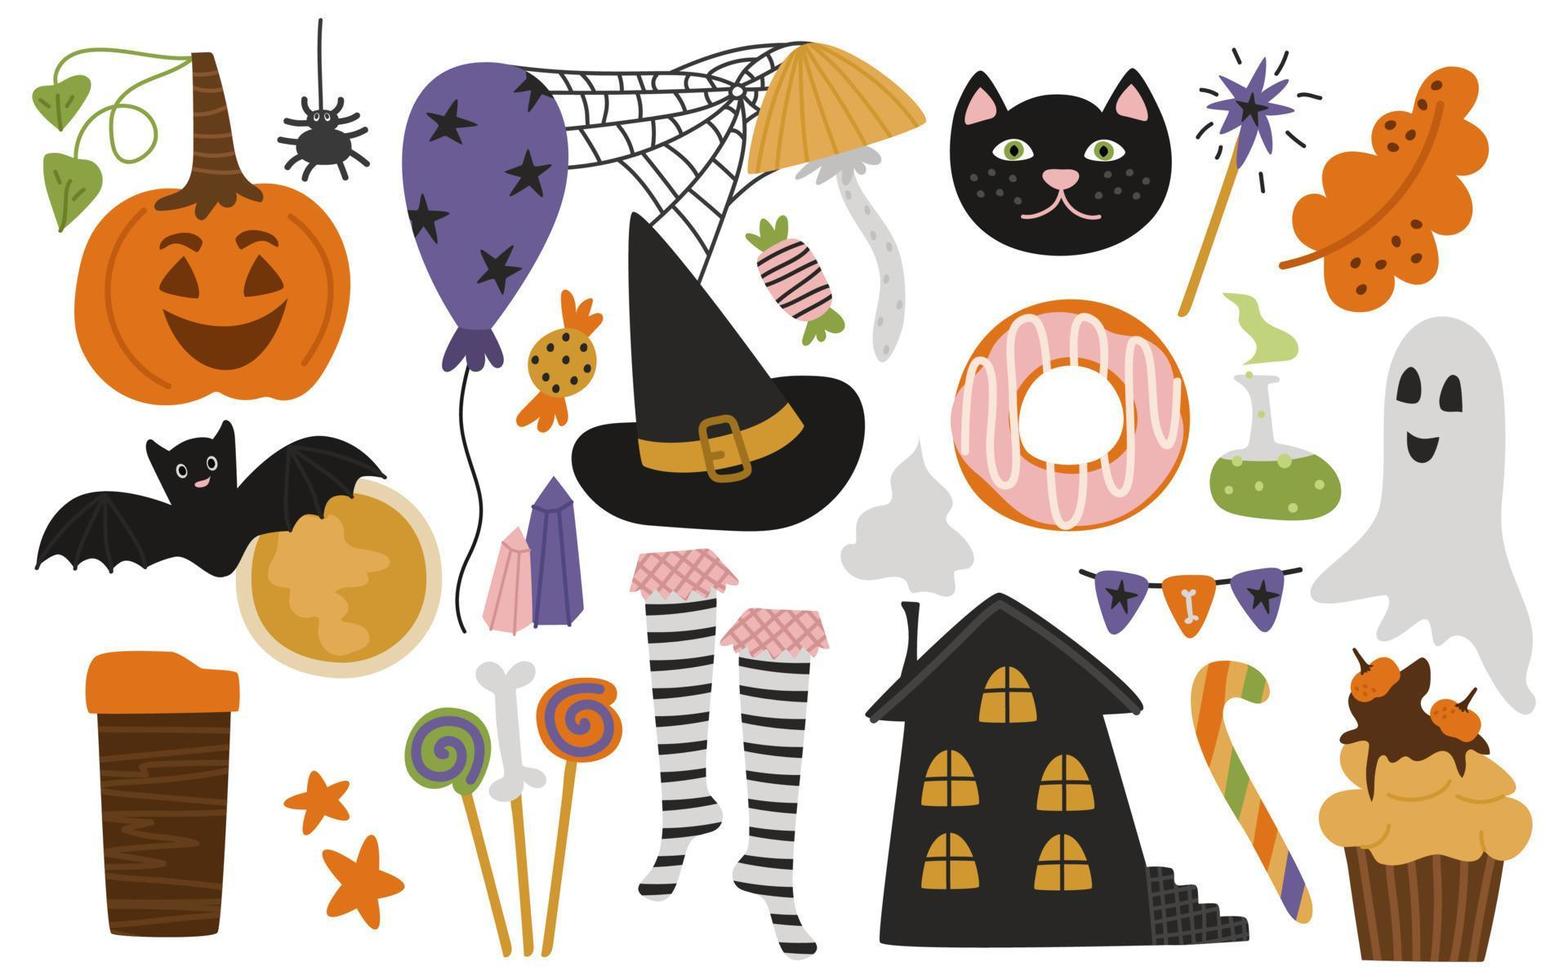 Halloween set for the holiday. Pumpkin, spider web, witch's house, potion, mushrooms, moon, crystals, donut, sweets, garland. Vector illustration isolated for falling design and decor.